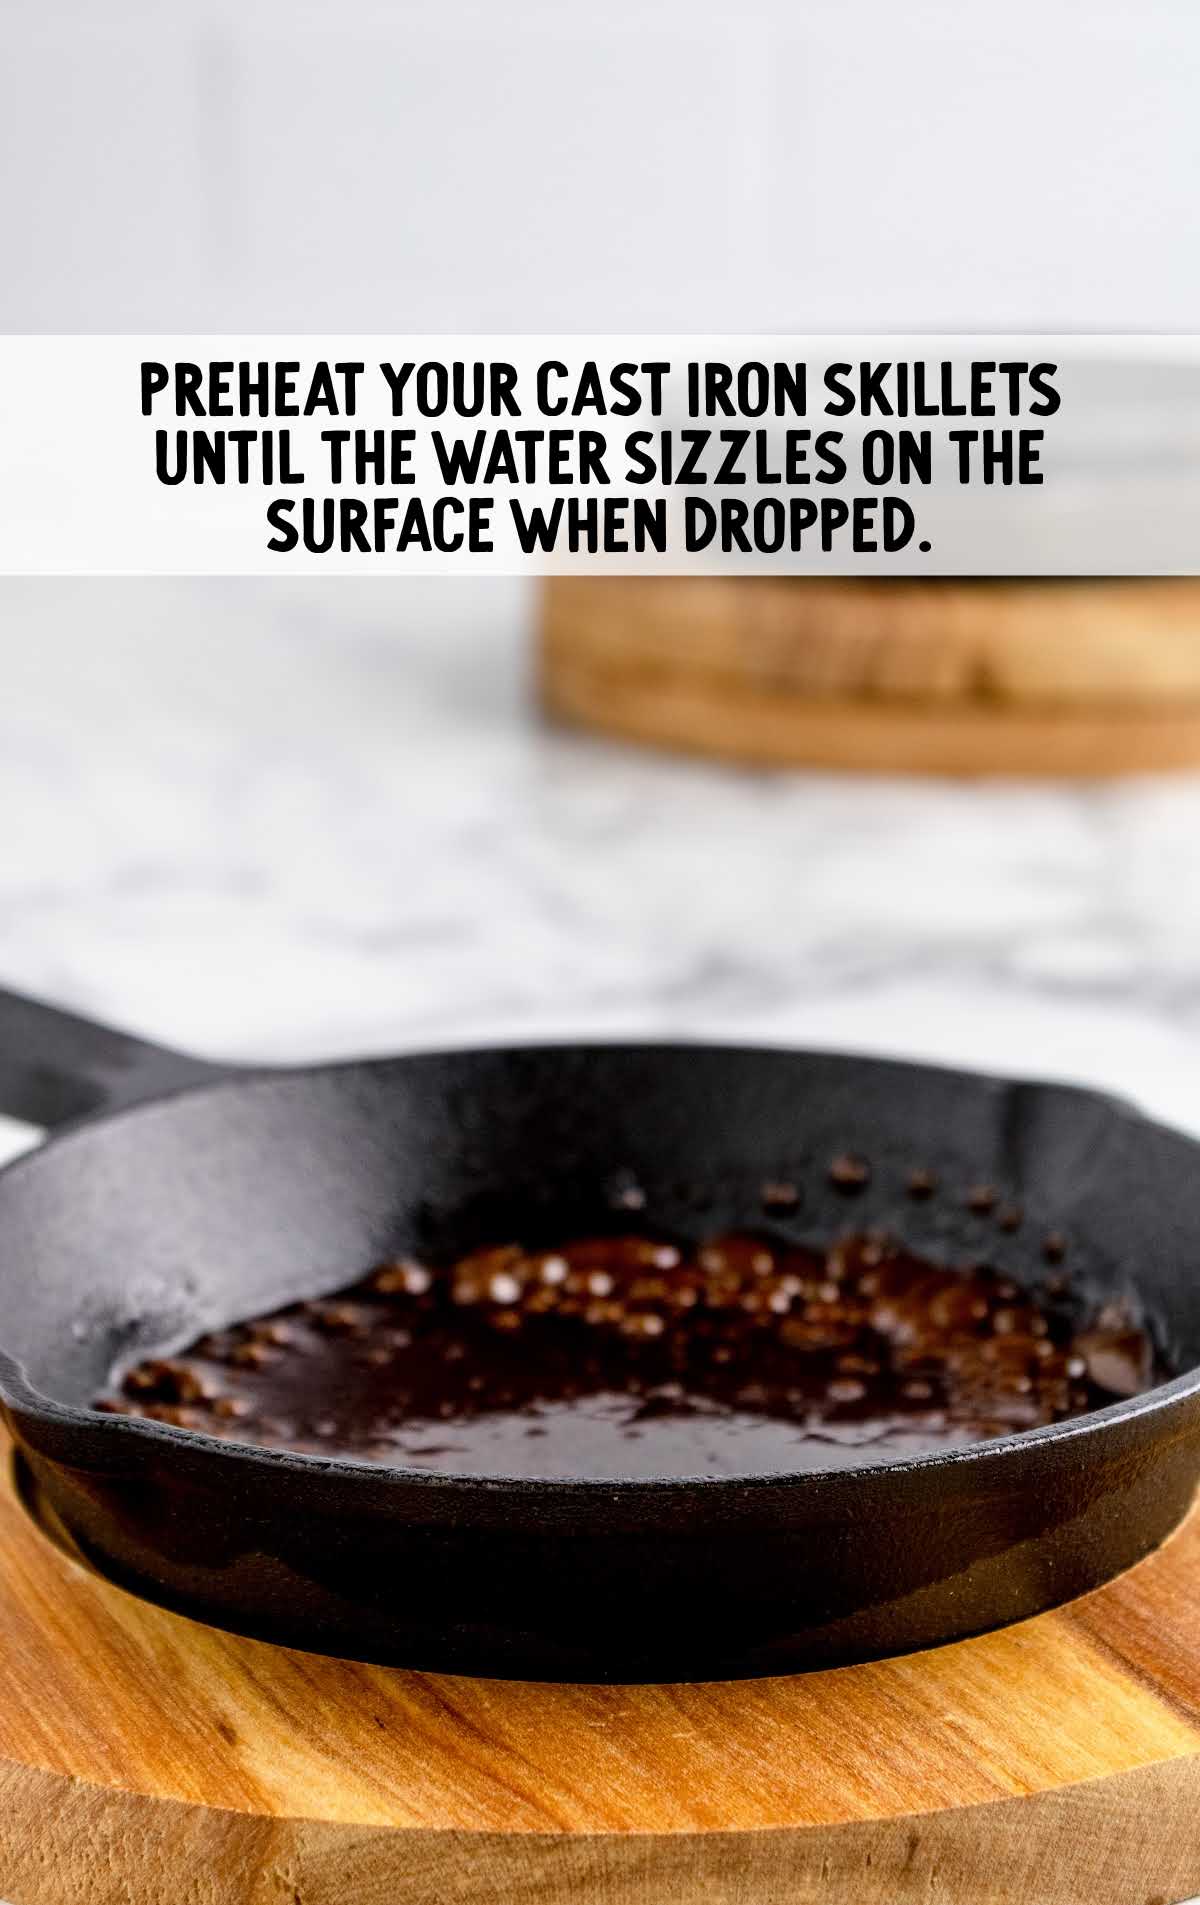 skillet preheated until water sizzled